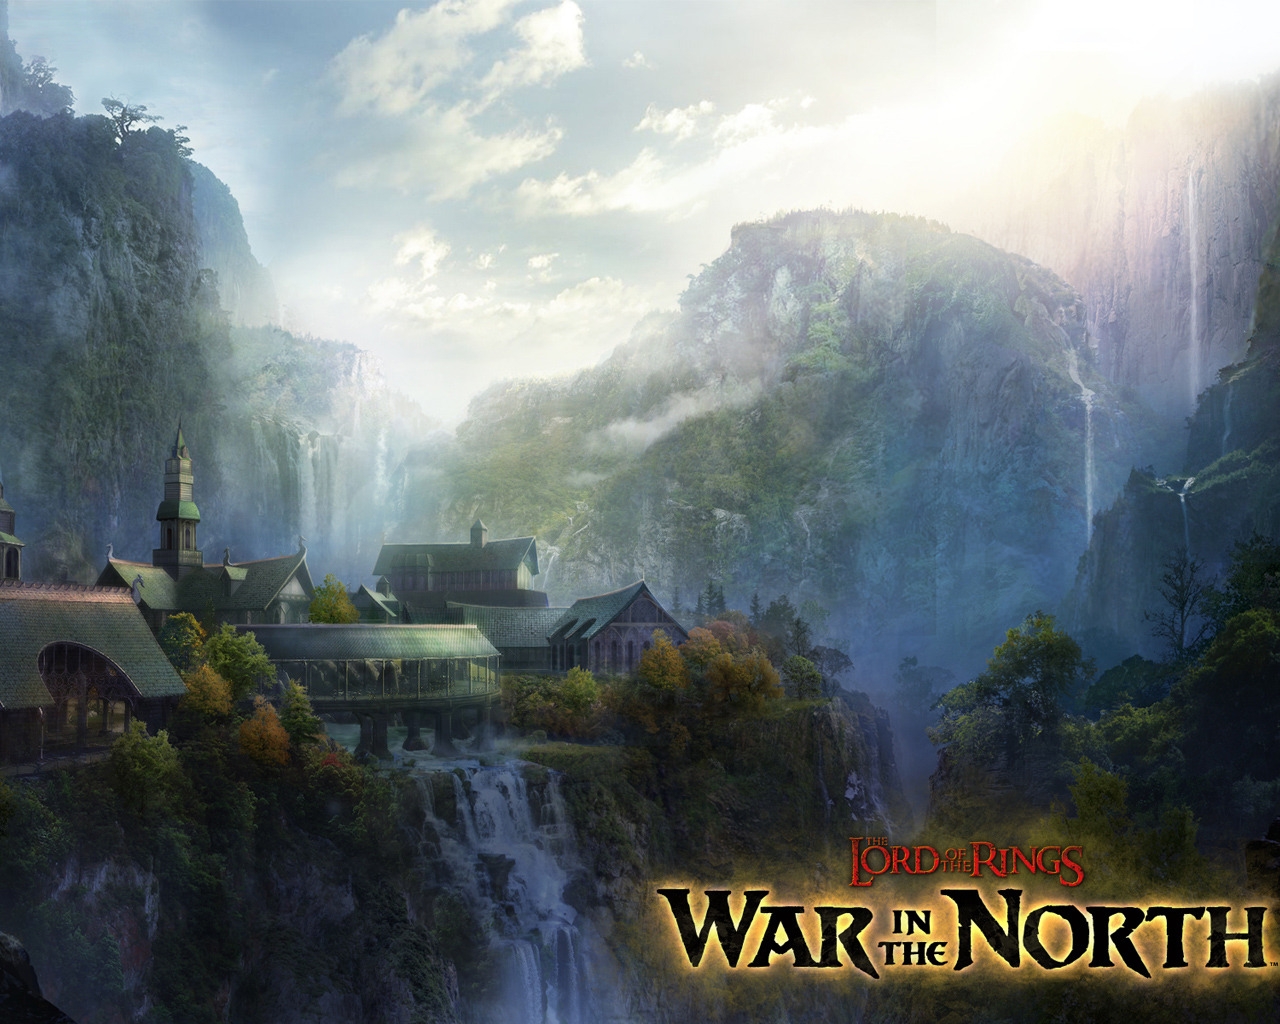 Rivendell War in the North for 1280 x 1024 resolution